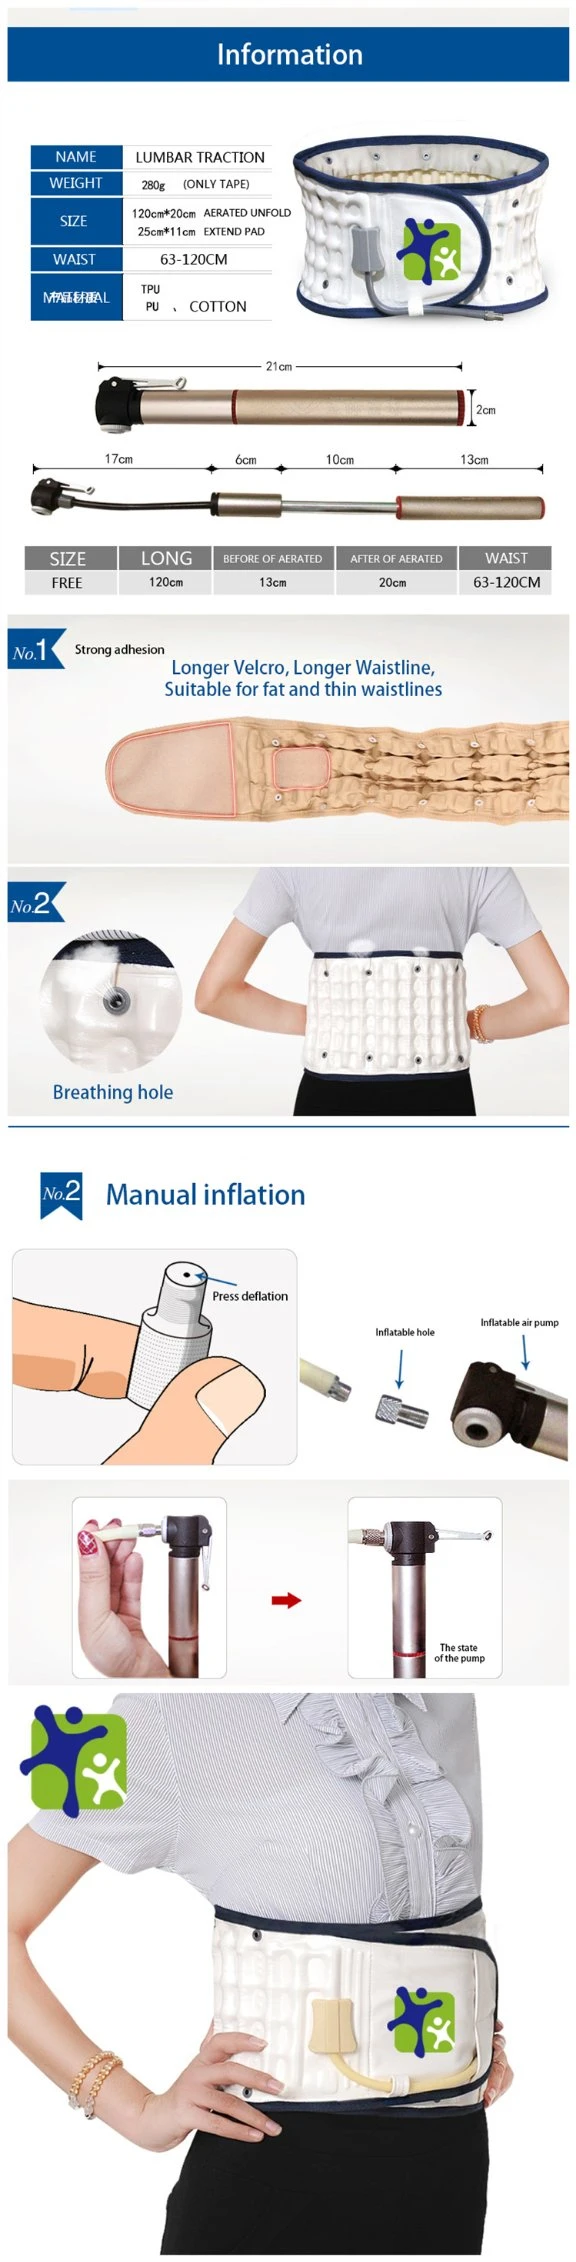 Medical Physiotherapy Orthopedic Air Inflated Waist Support Belt Lumbar Traction Device